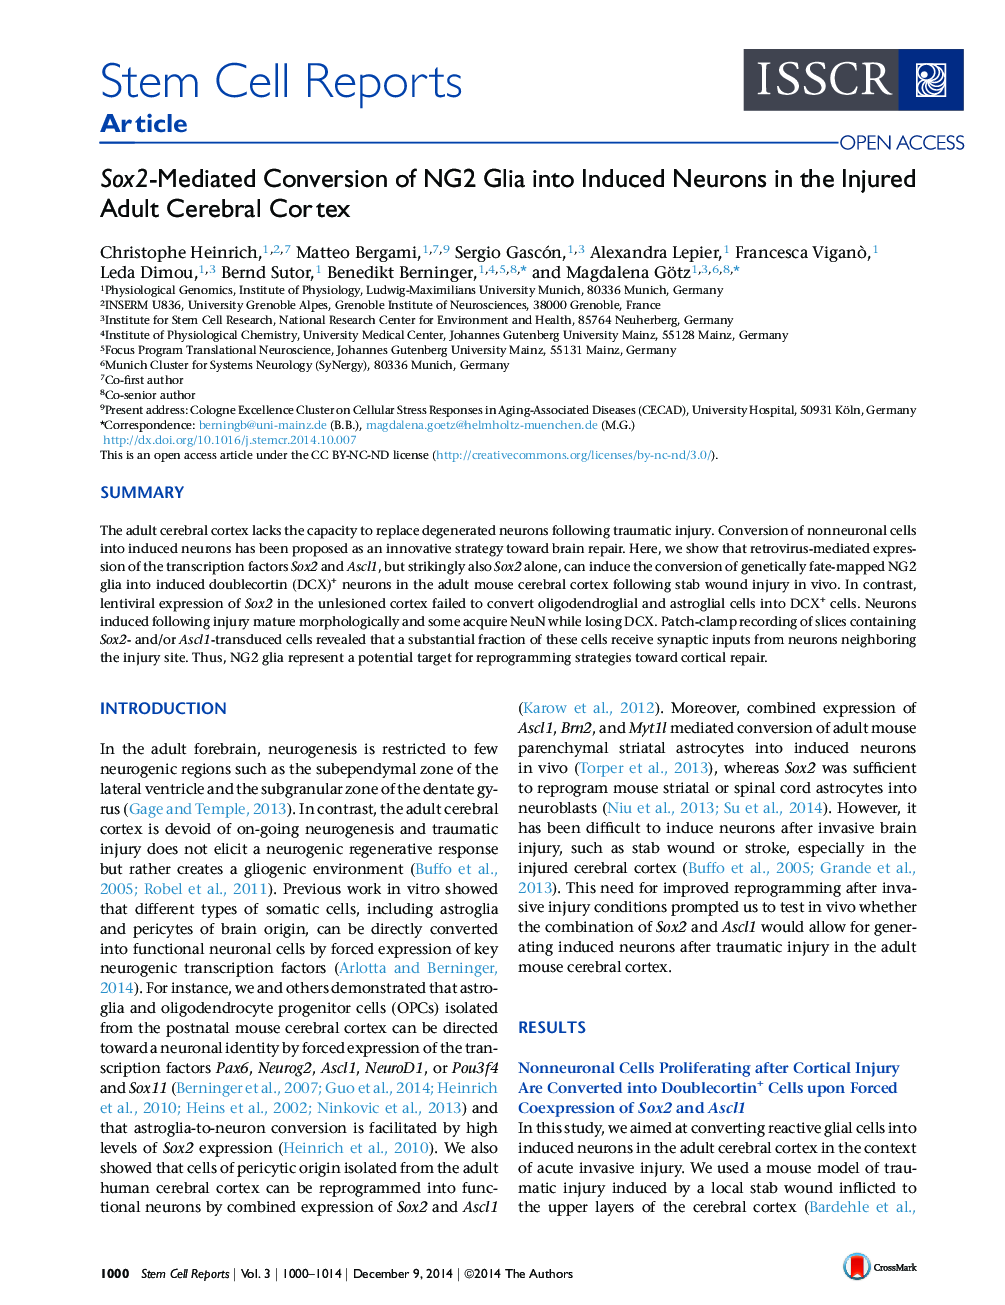 Sox2-Mediated Conversion of NG2 Glia into Induced Neurons in the Injured Adult Cerebral Cortex 